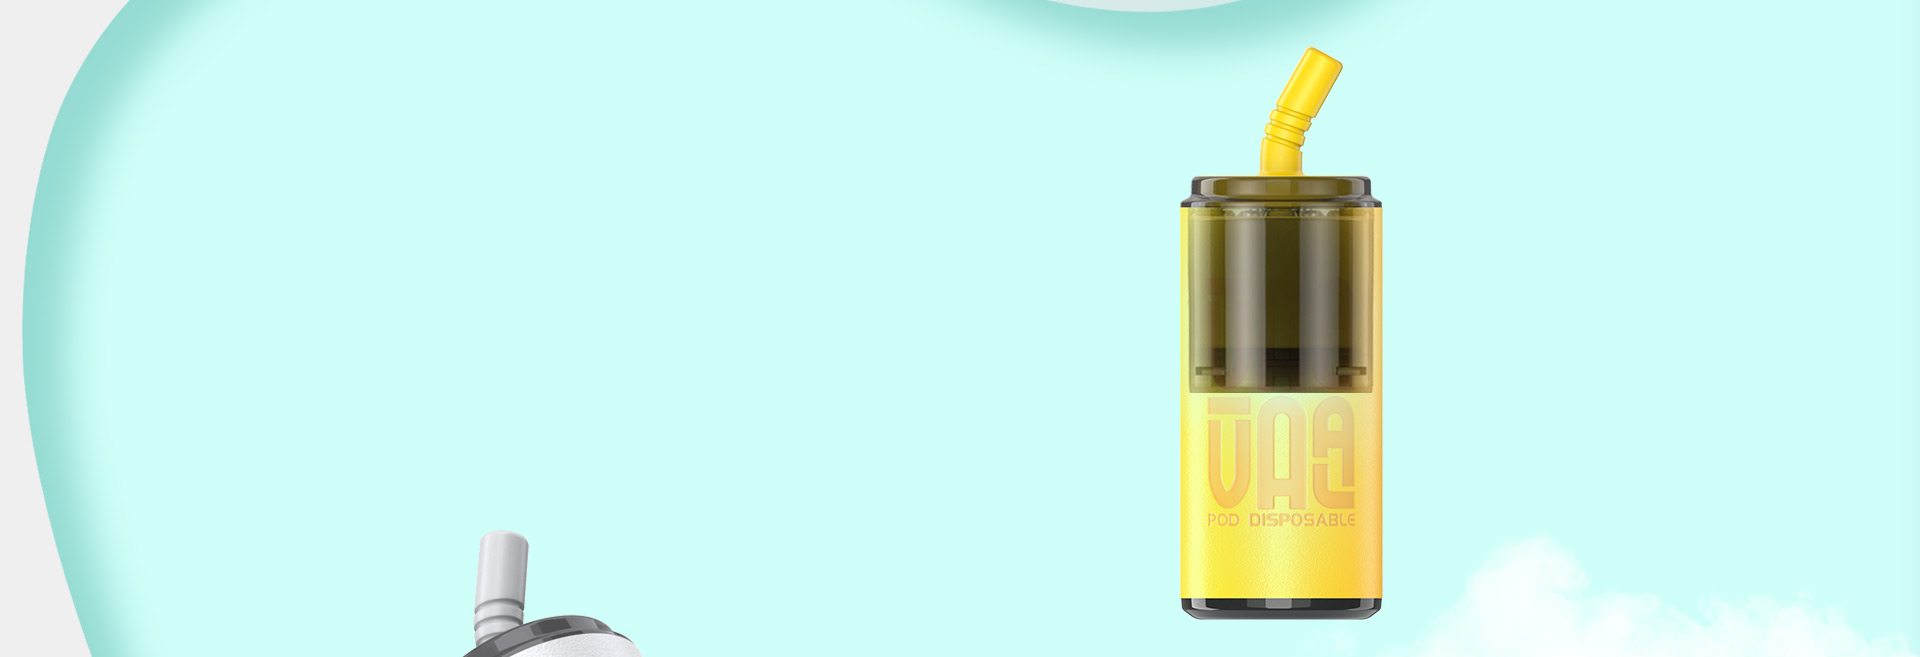 With a whopping 12ml e-liquid capacity, the VAAL 6000 enables you to savor up to 6000 puffs and indulge in the freedom to fully enjoy your day.